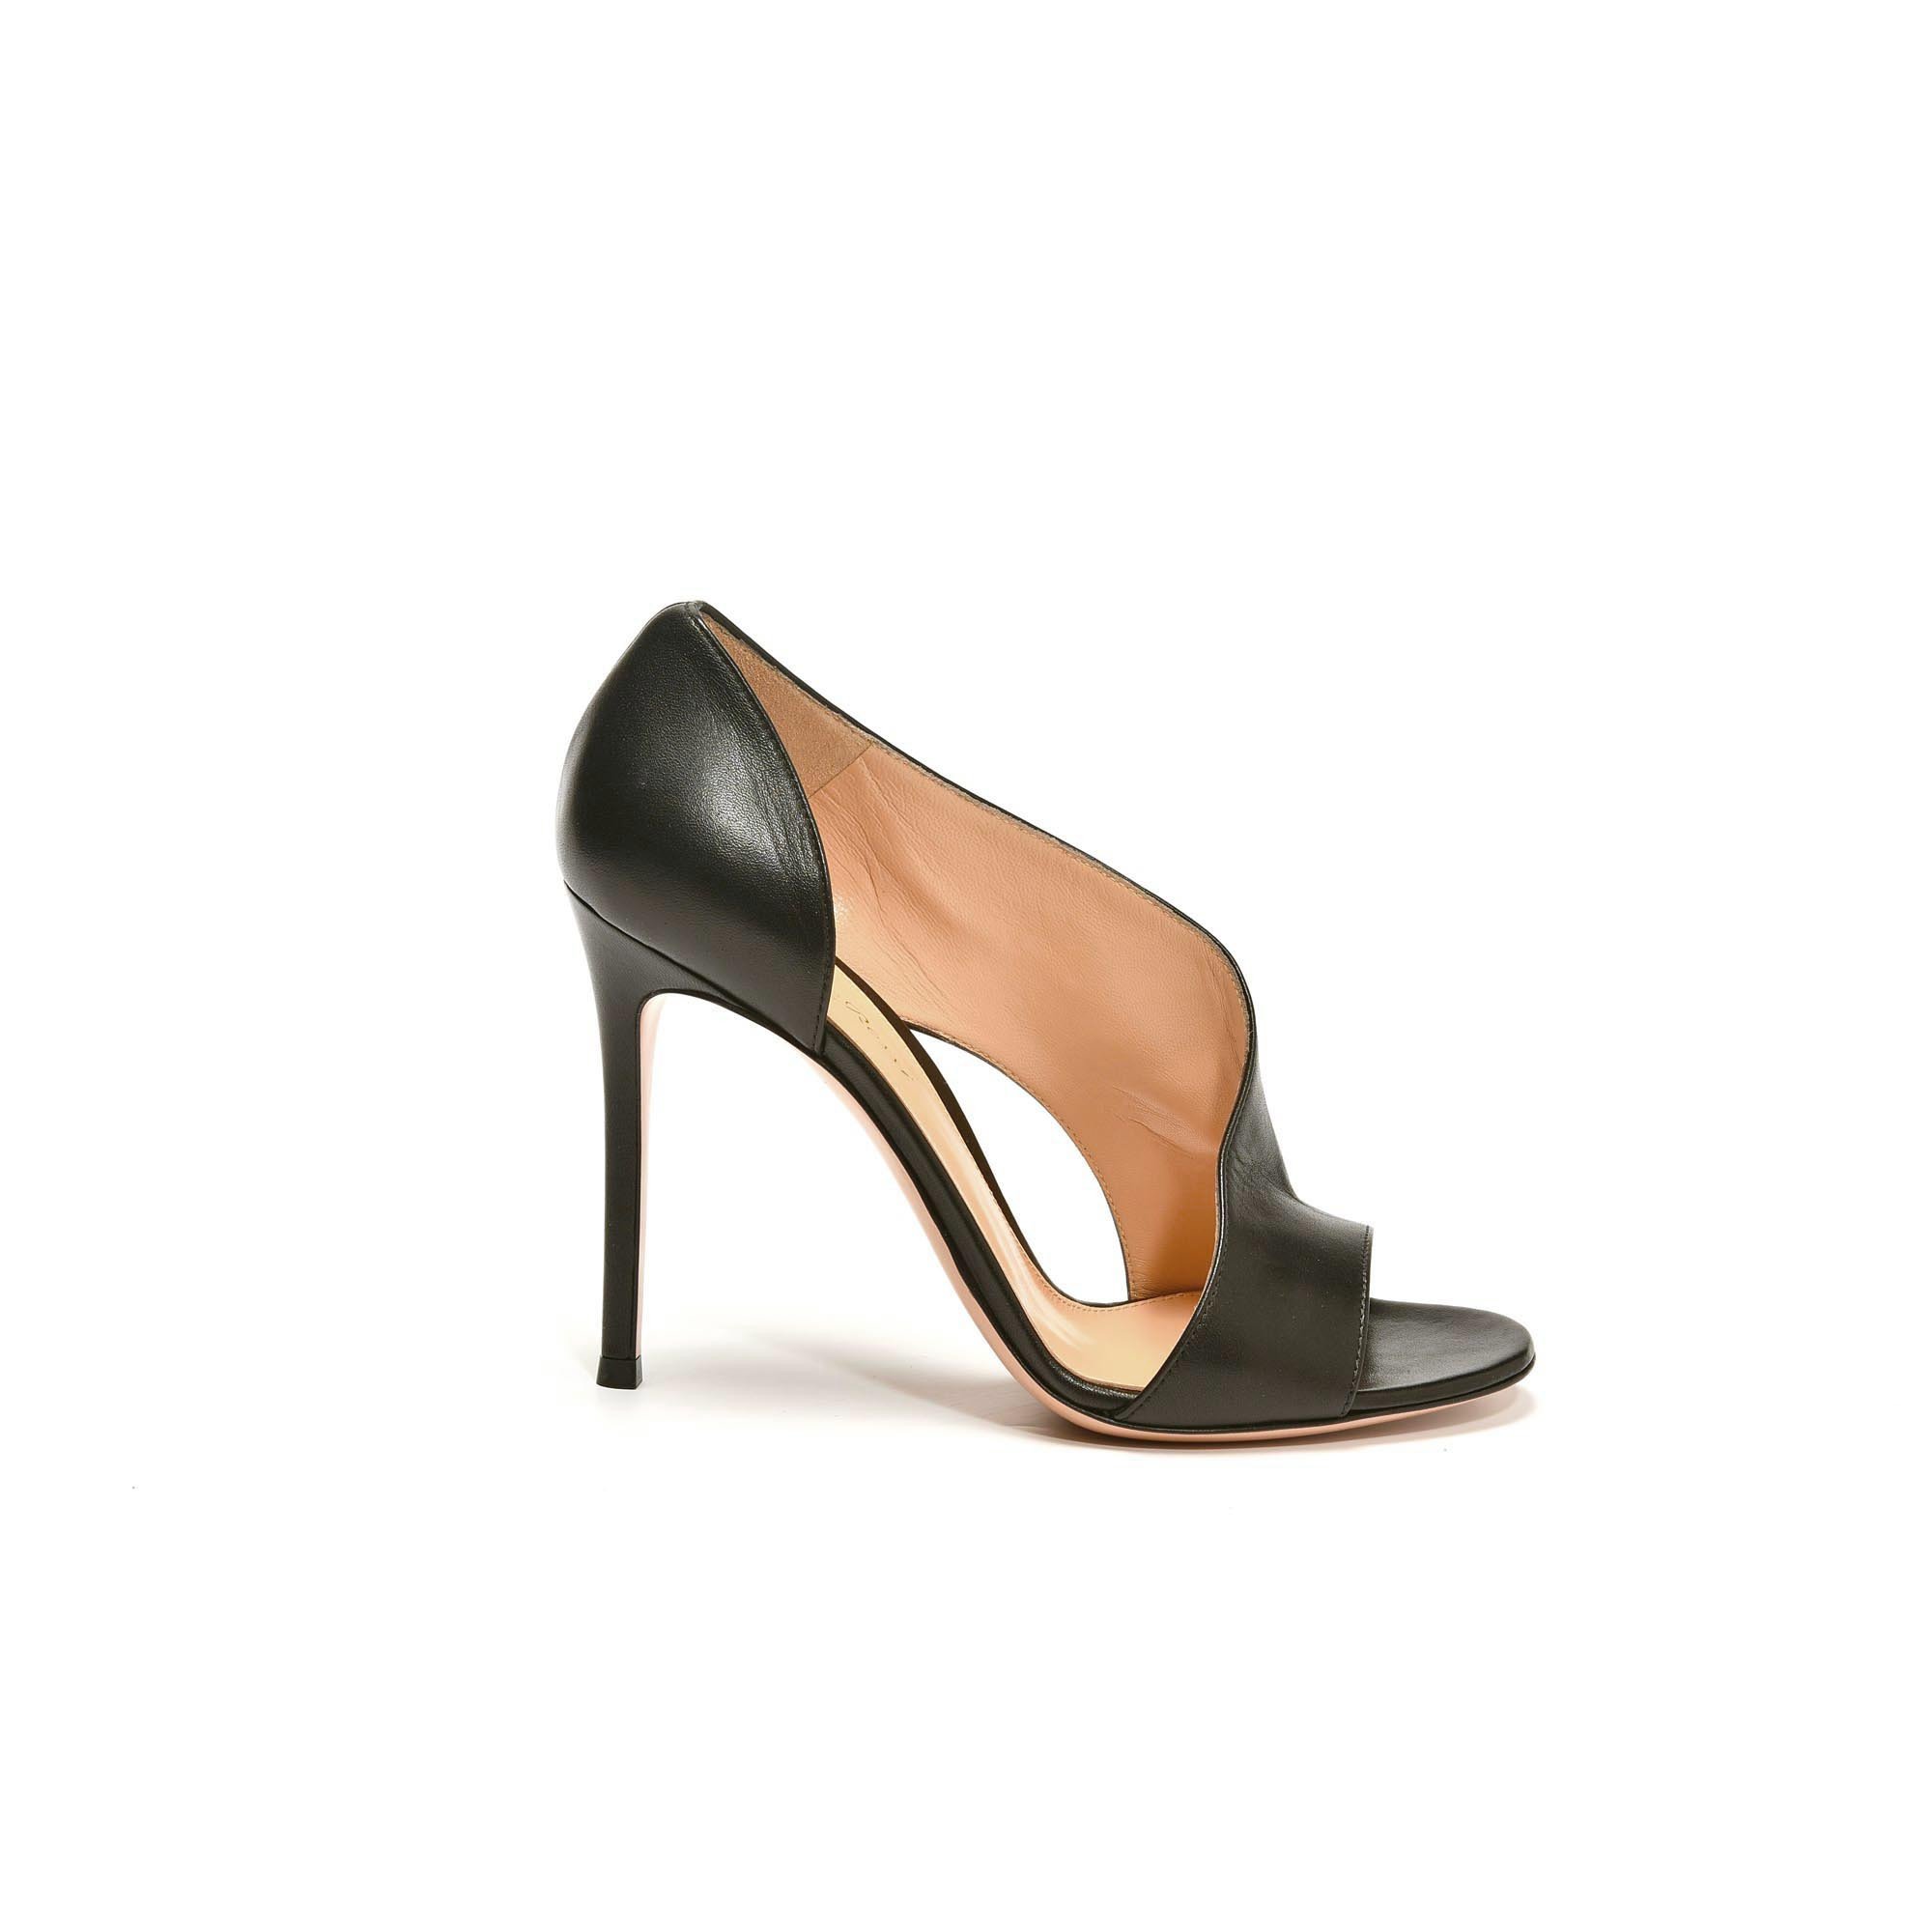 Femme Chaussures Gianvito Rossi Femme Sandales nu-pieds Gianvito Rossi Femme Sandales à talons Gianvito Rossi Femme Sandales à talons Gianvito Rossi Femme Sandales à talons GIANVITO ROSSI 41 noir 